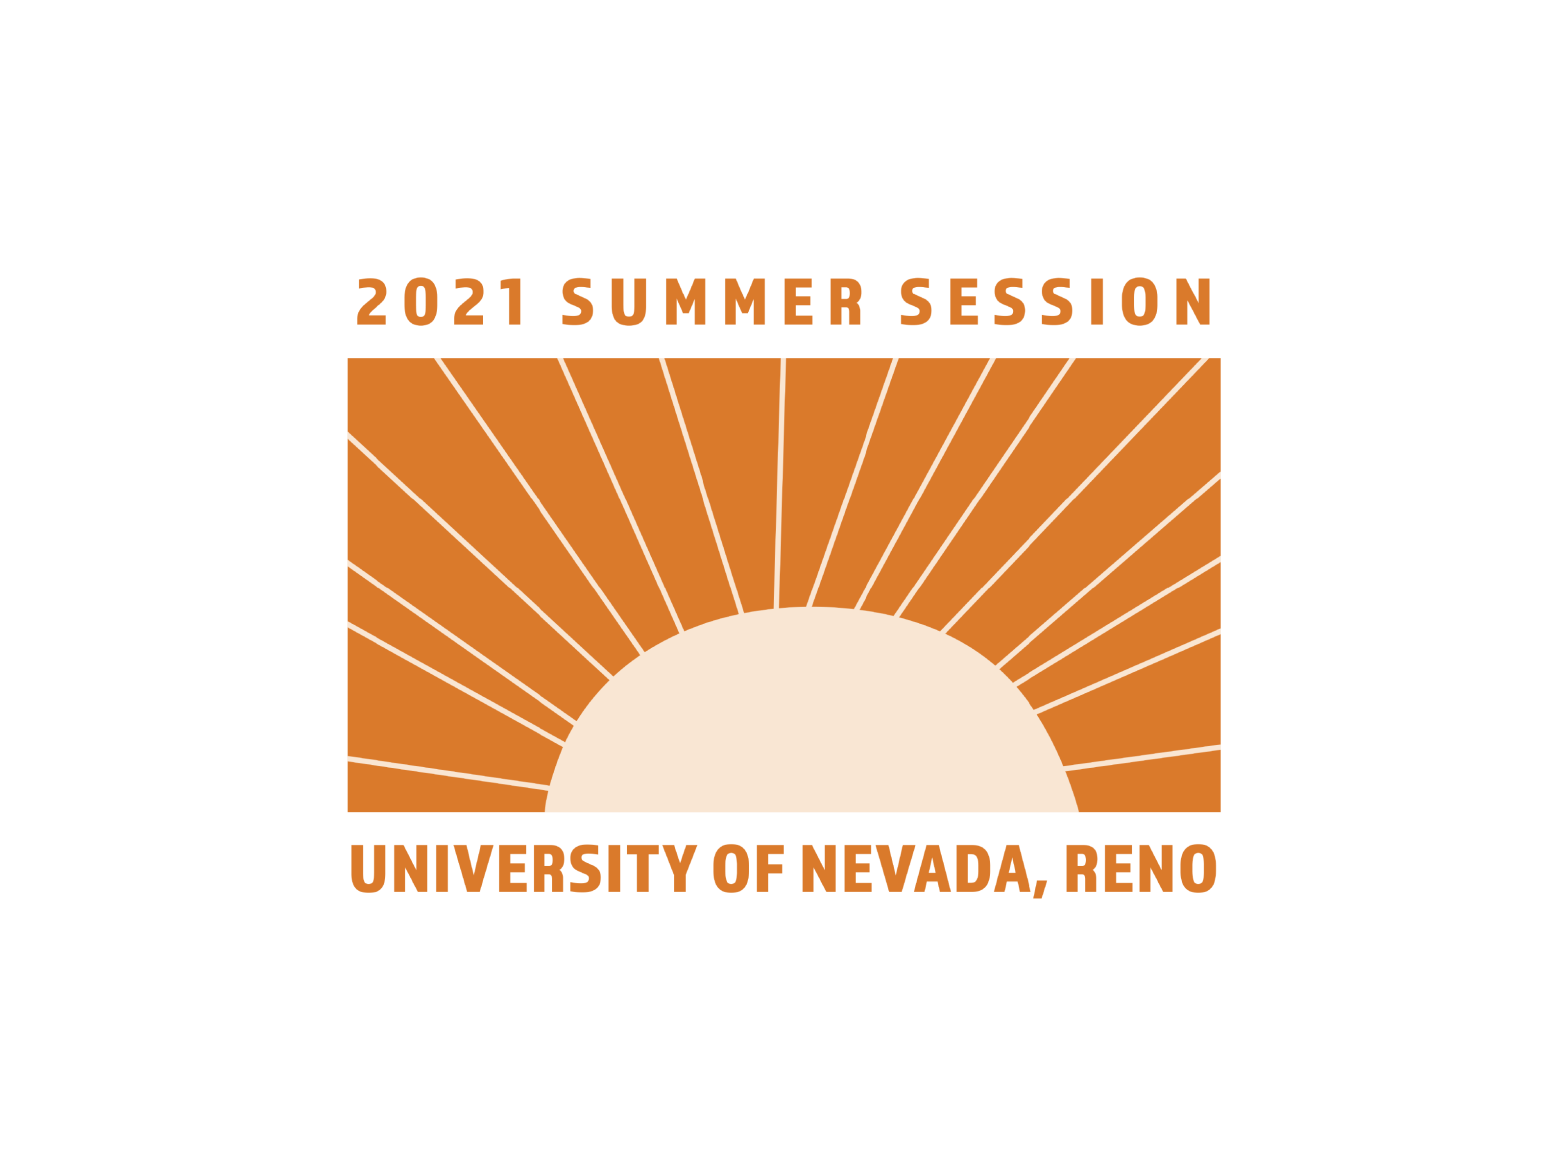 University of Nevada, Reno Summer Session 2021 Logo by Muse Group